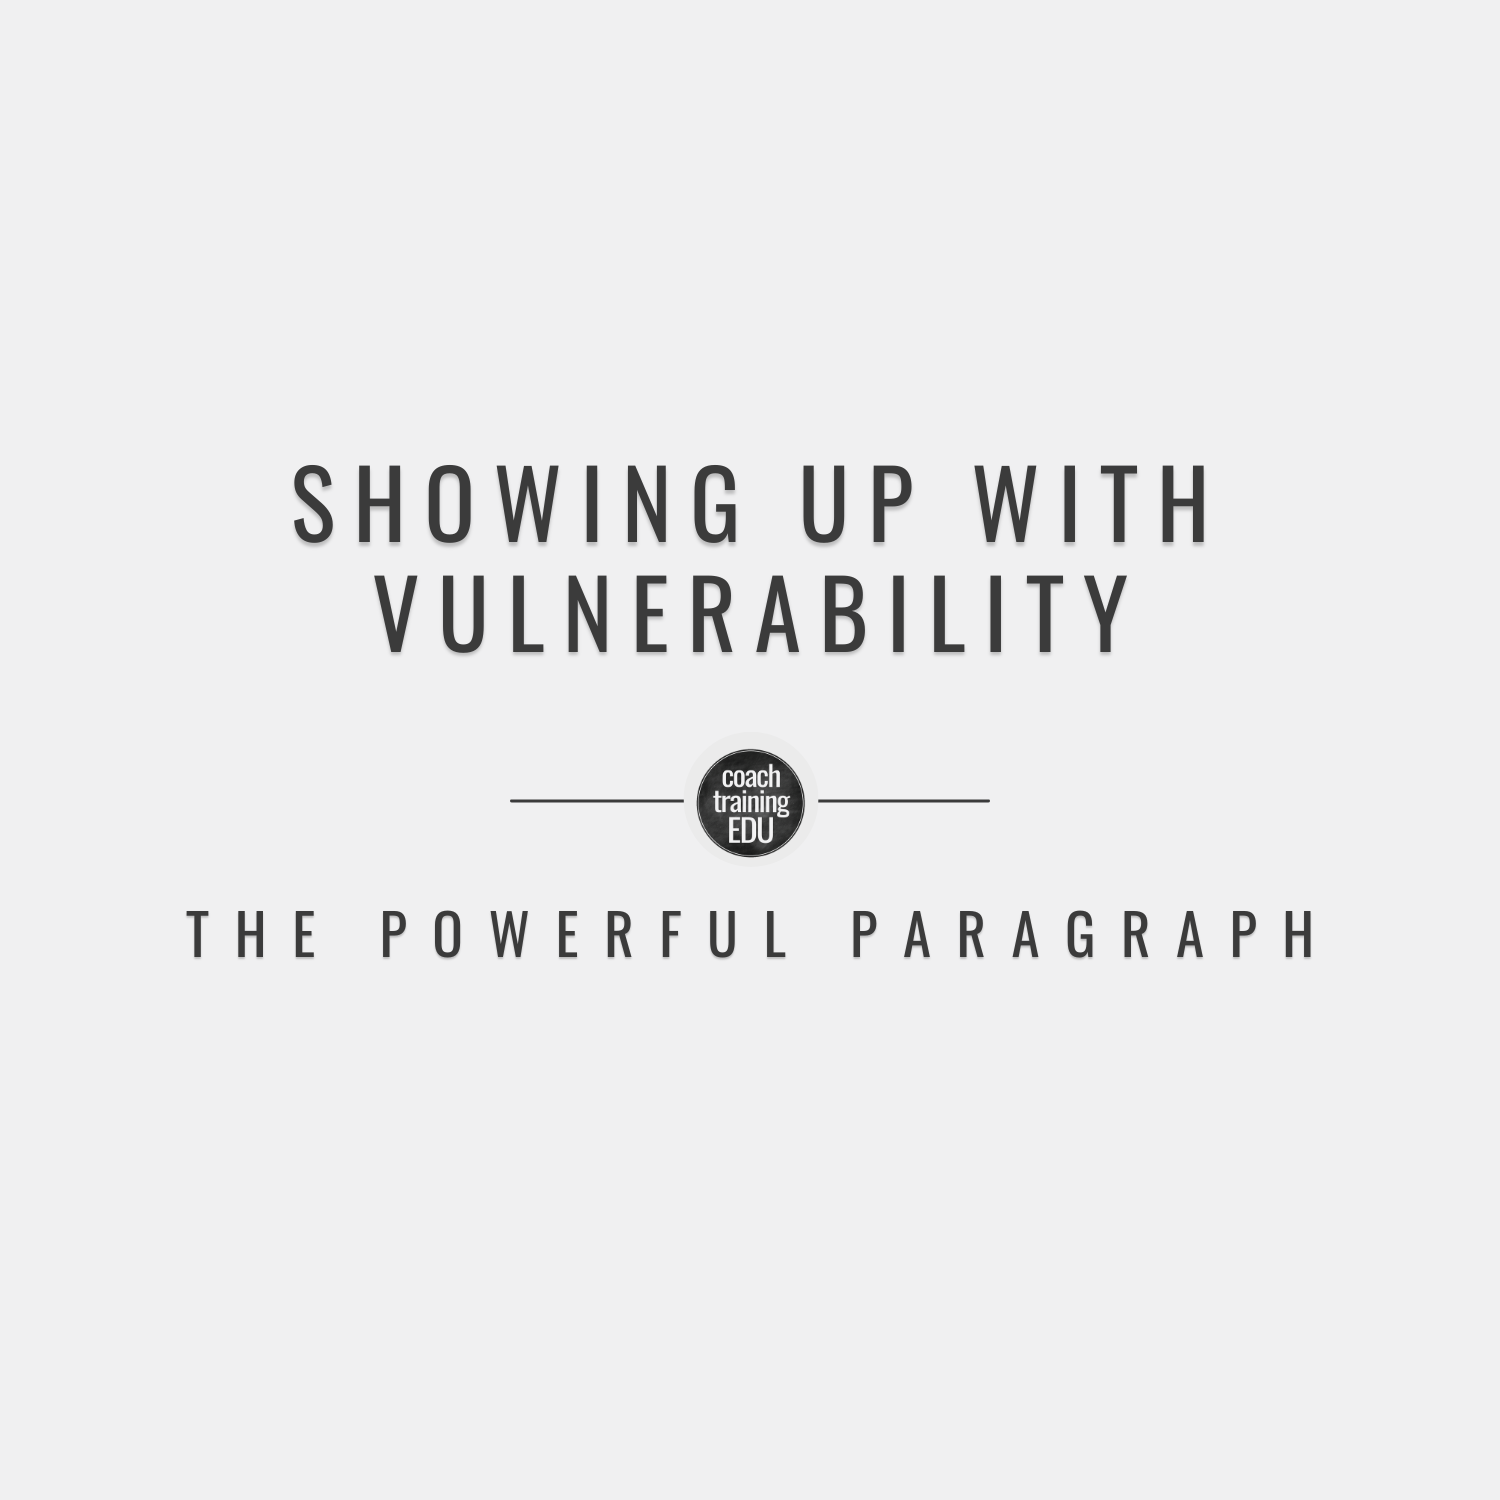 Showing Up with Vulnerability